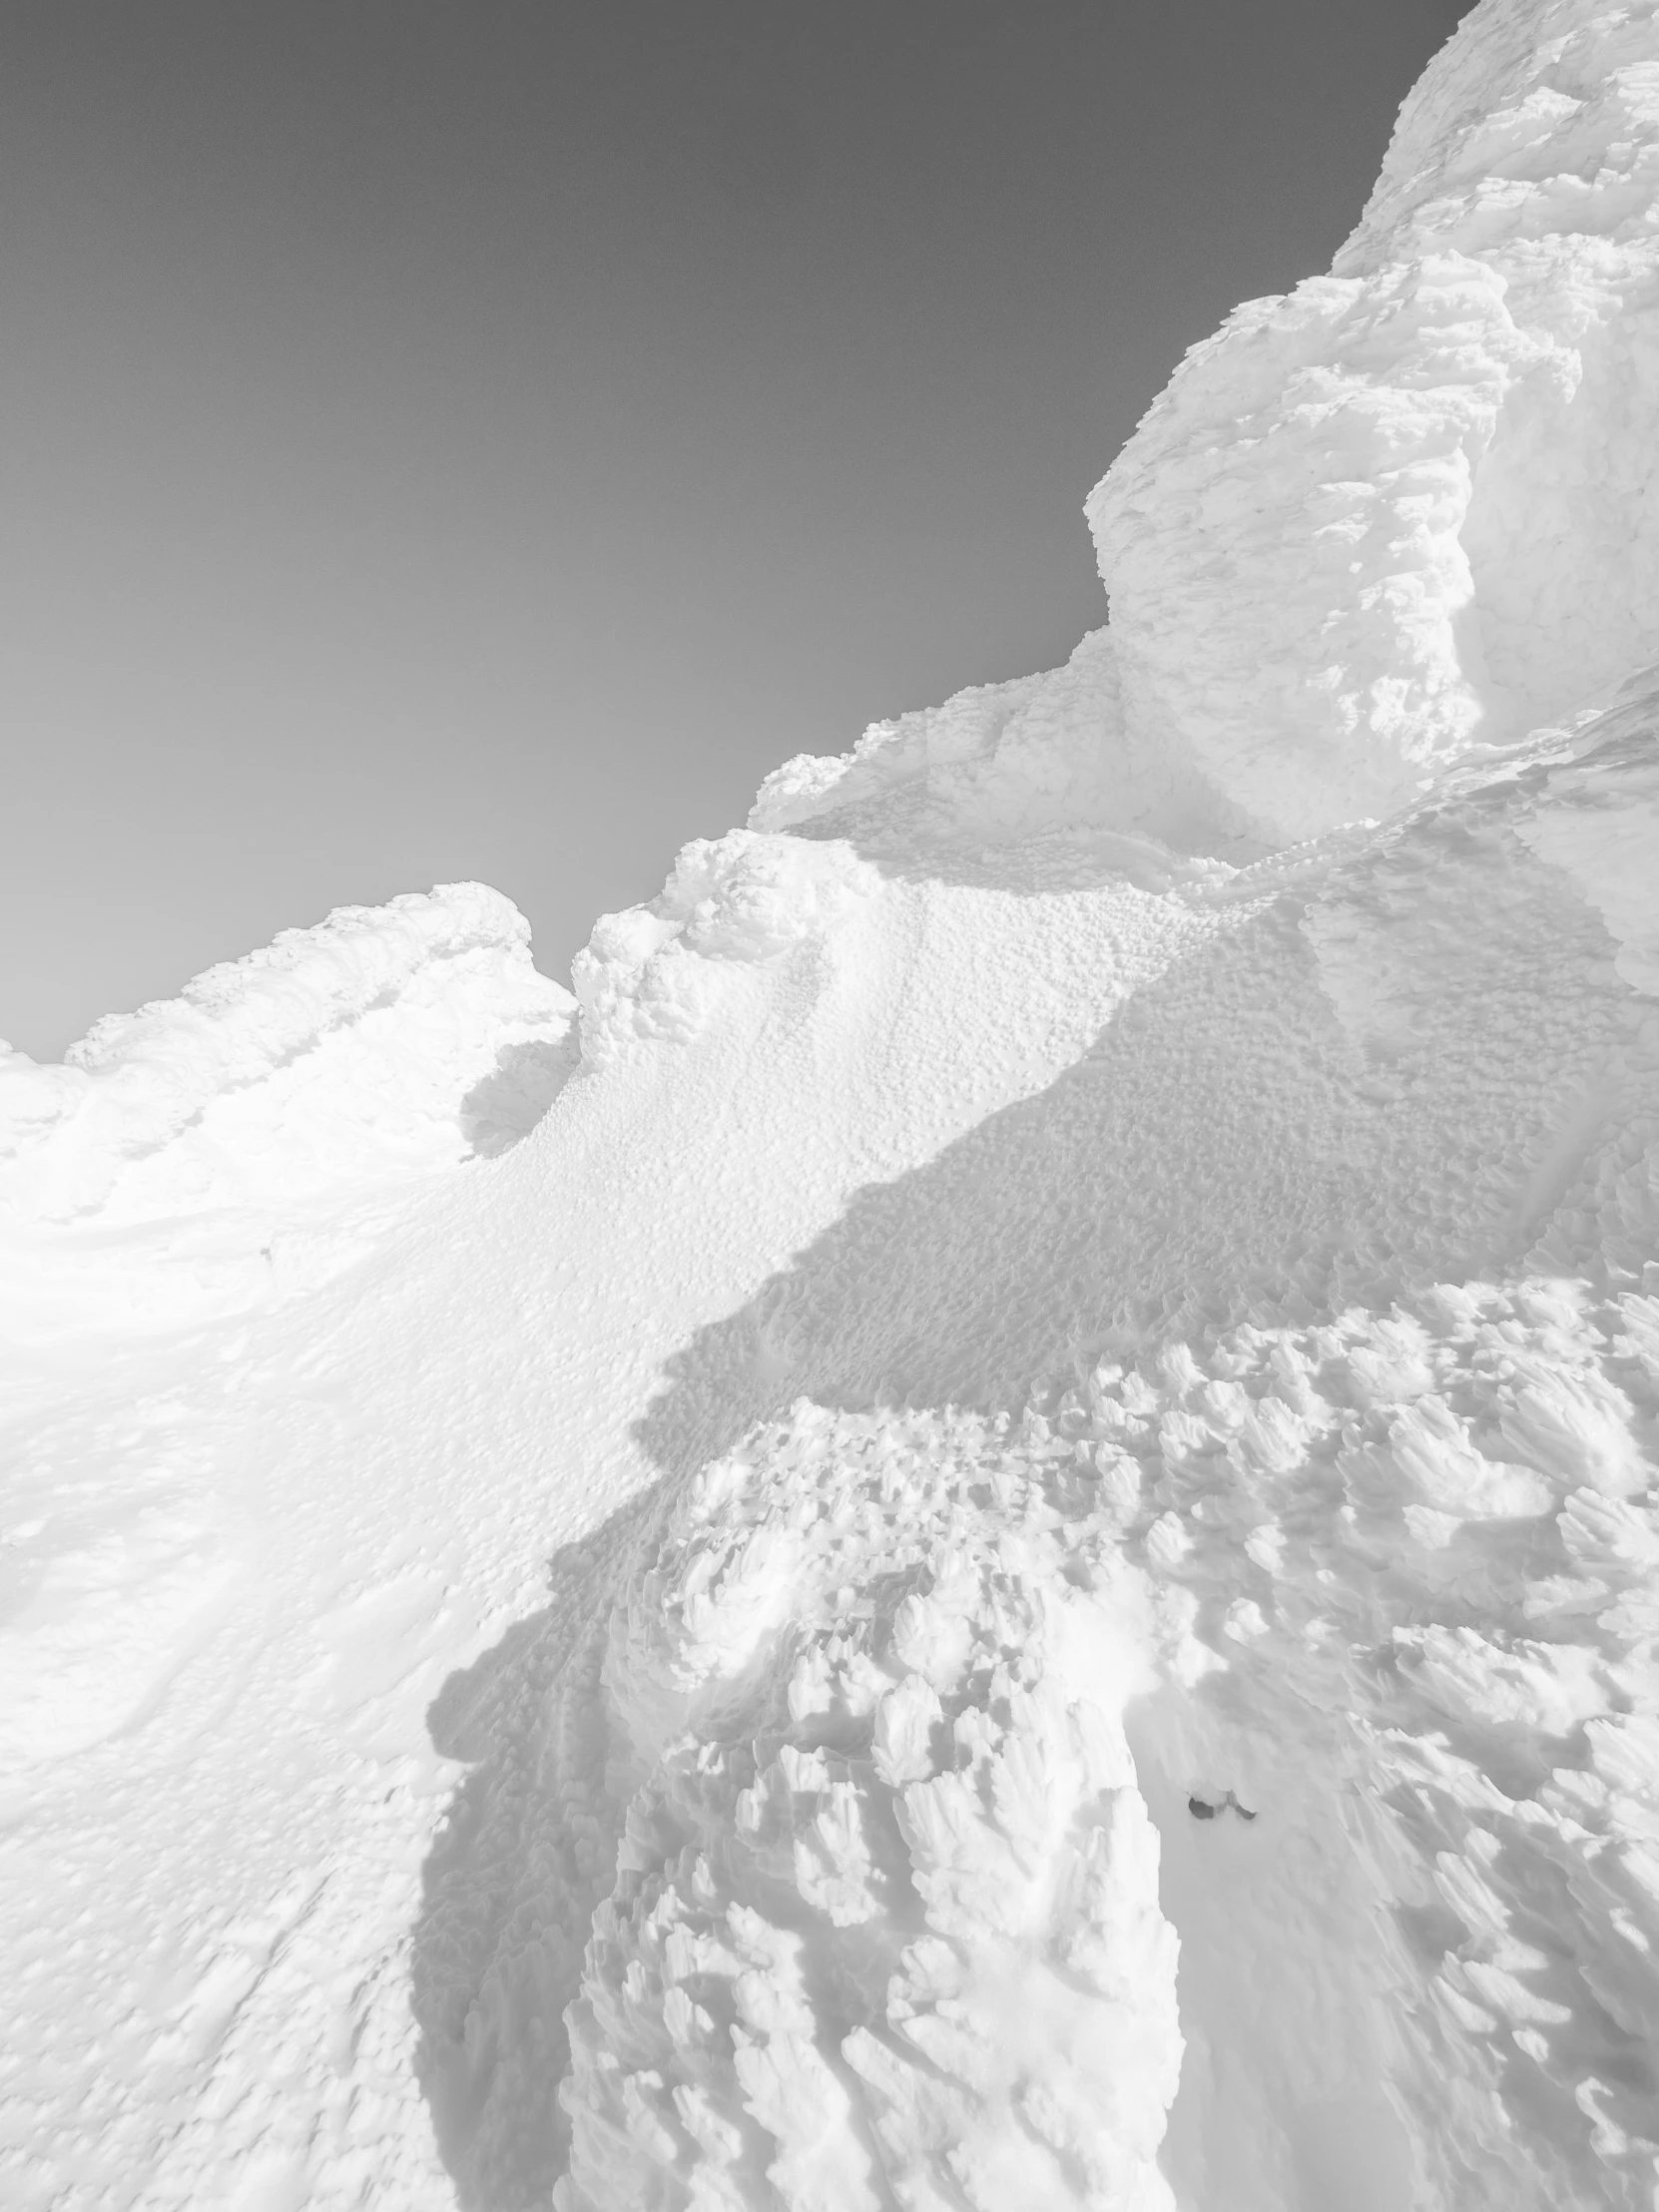 a man riding a snowboard down the side of a snow covered slope, an ambient occlusion render, by Matthias Weischer, trending on unsplash, process art, lots of white cotton, epic land formations, close-up!!!!!, stacked image